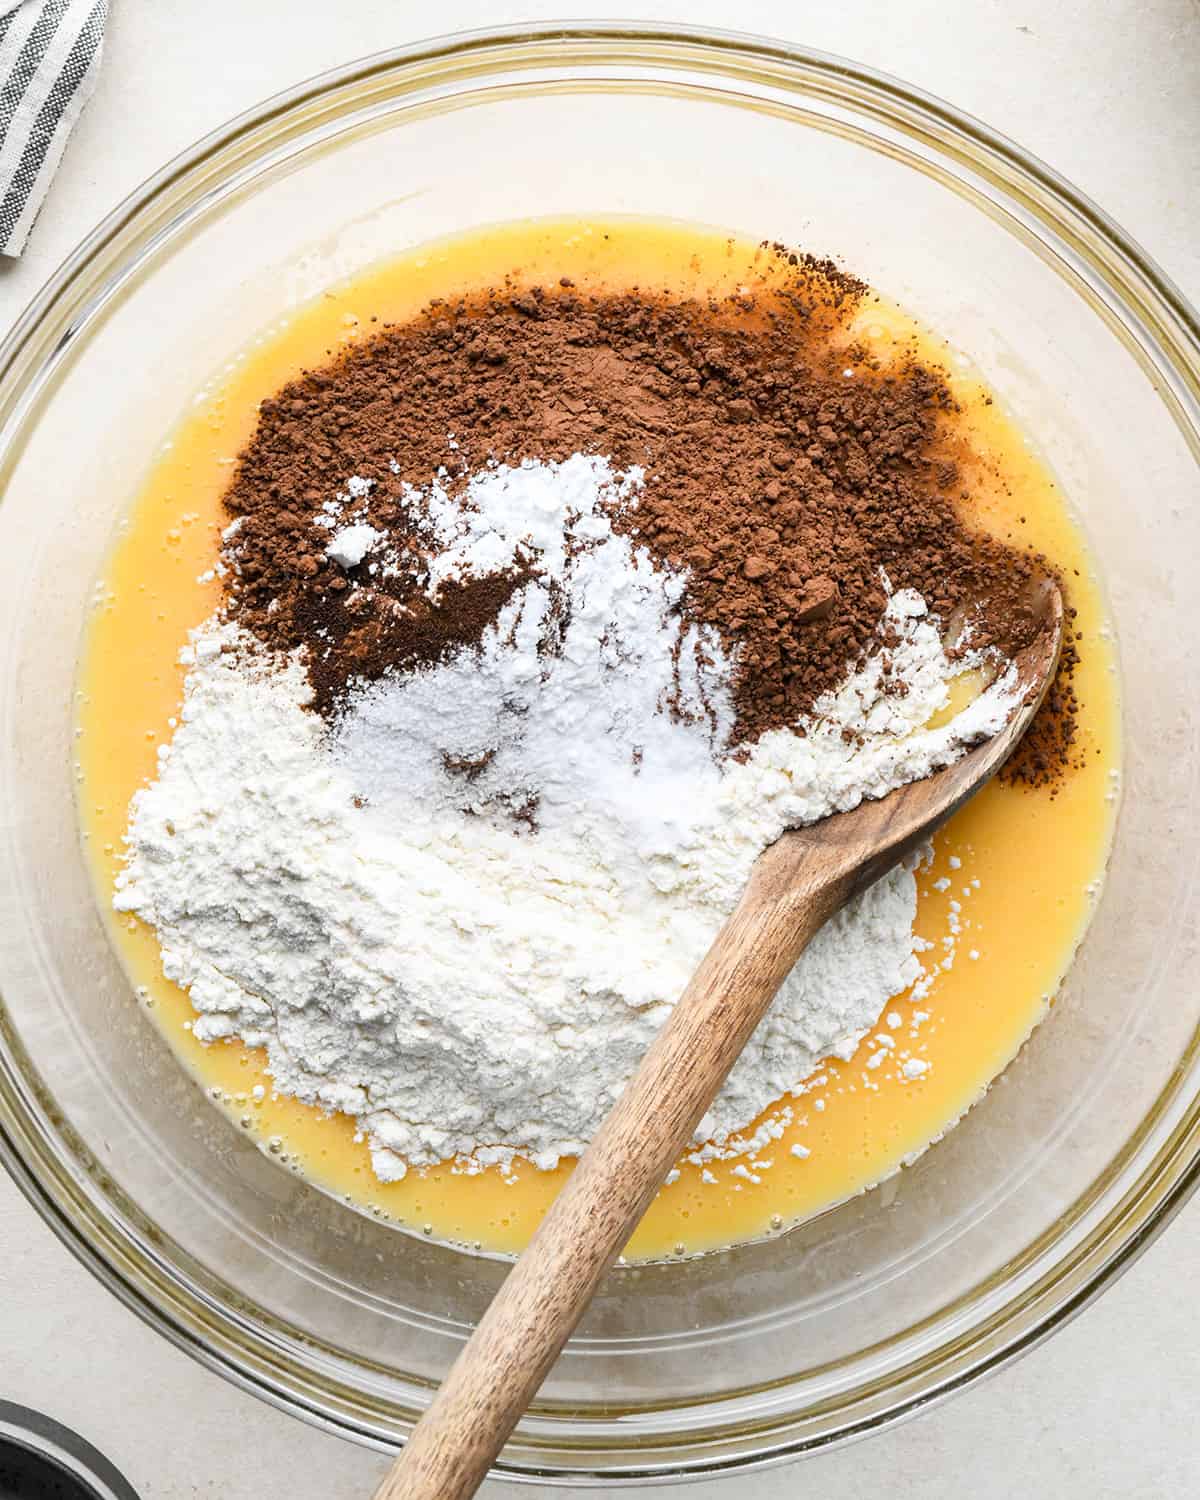 How to Make an Ice Cream Cake - dry ingredients in a bowl before mixing